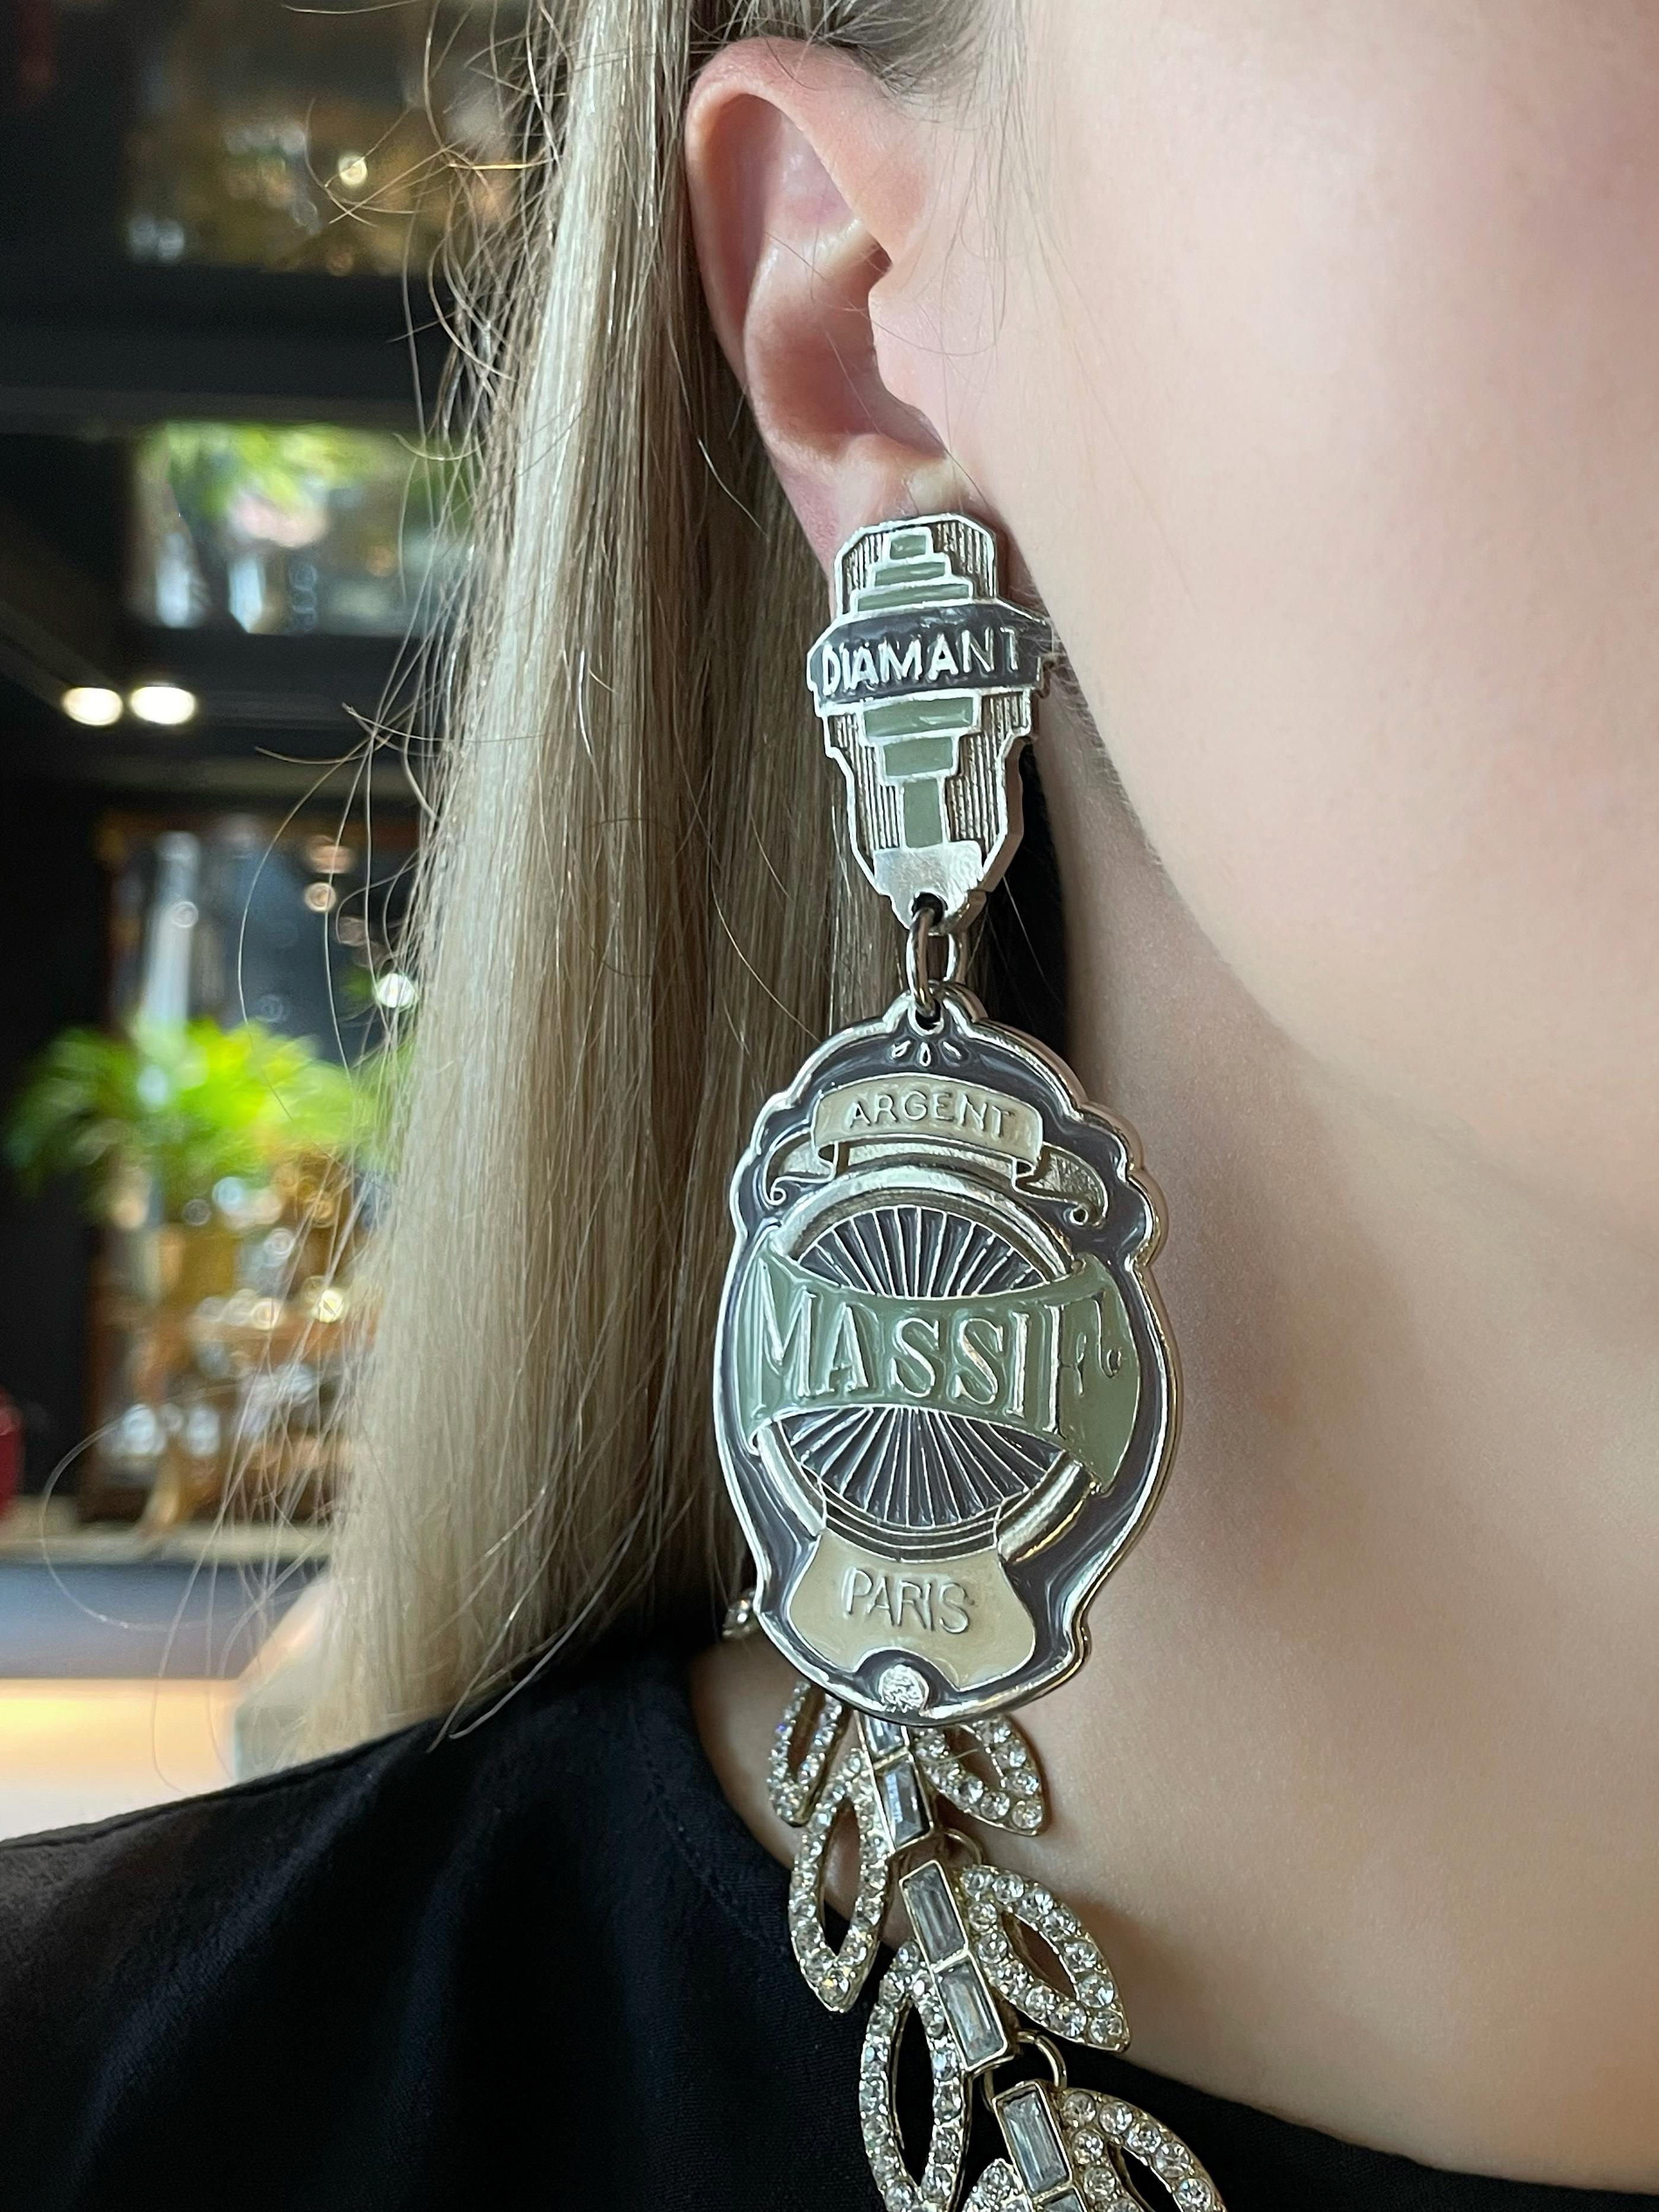 This is a vintage pair of massive dangling clip on earrings designed by Jean Paul Gaultier in 1990’s. The piece is crafted in silver tone and is adorned with enamel.

Heavy, but firmly sits on the ear.

“Diamant. Argent. Massif. Paris